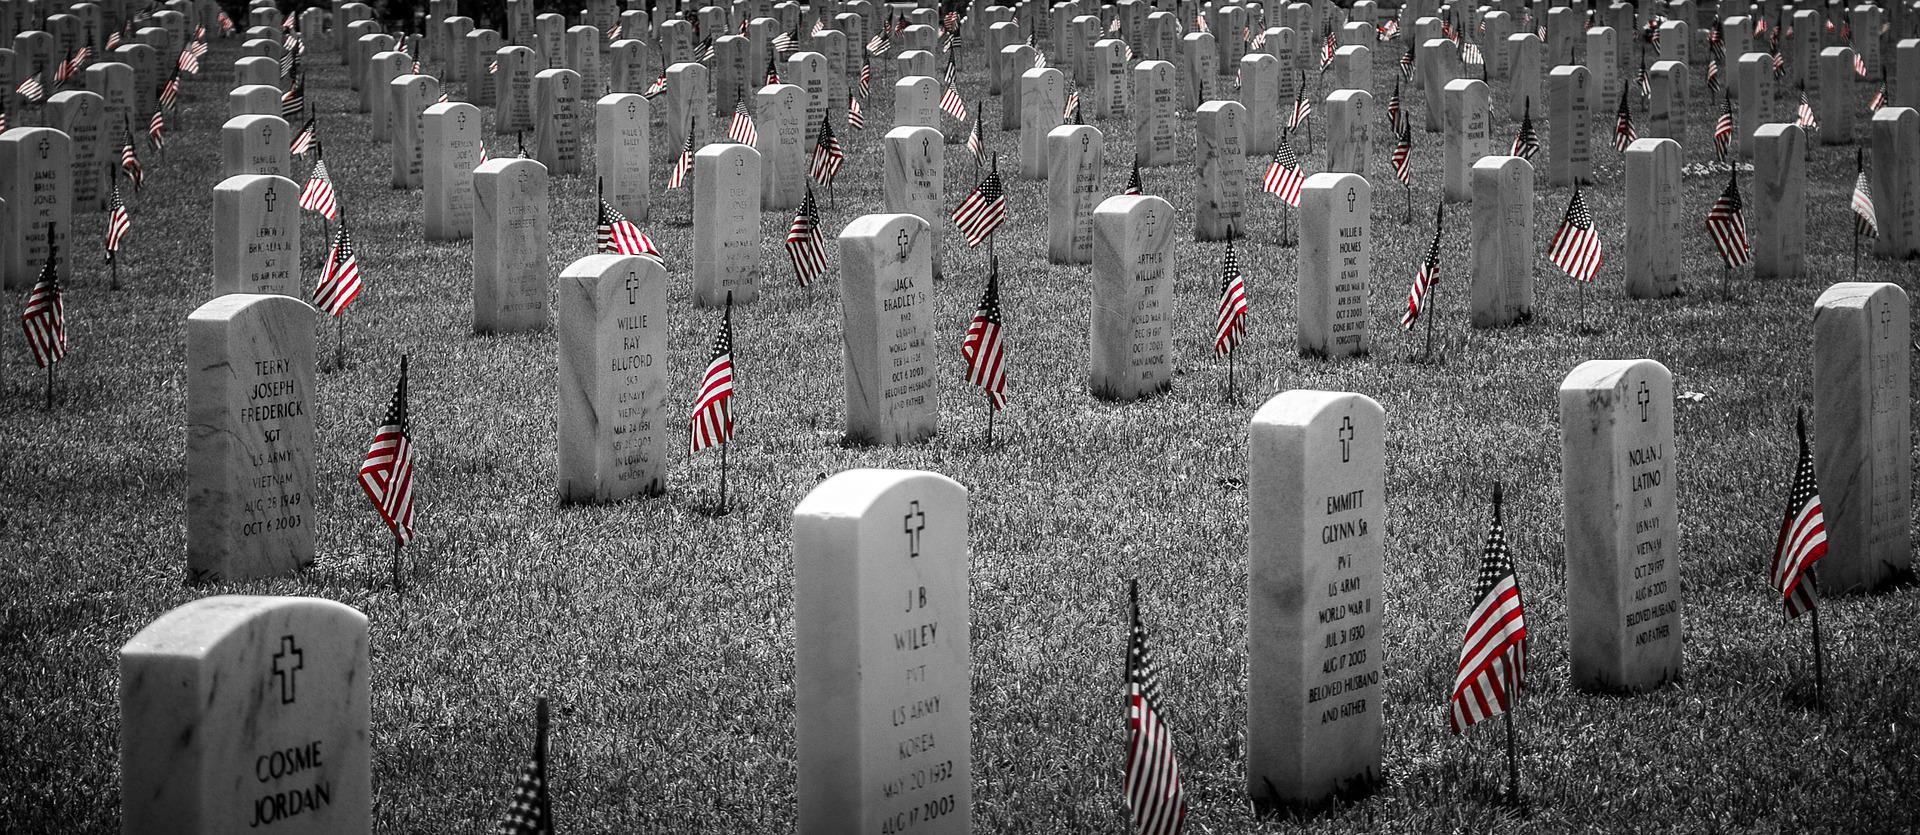 When everyone is a hero no one is a hero. On Memorial Day remember real heroes.